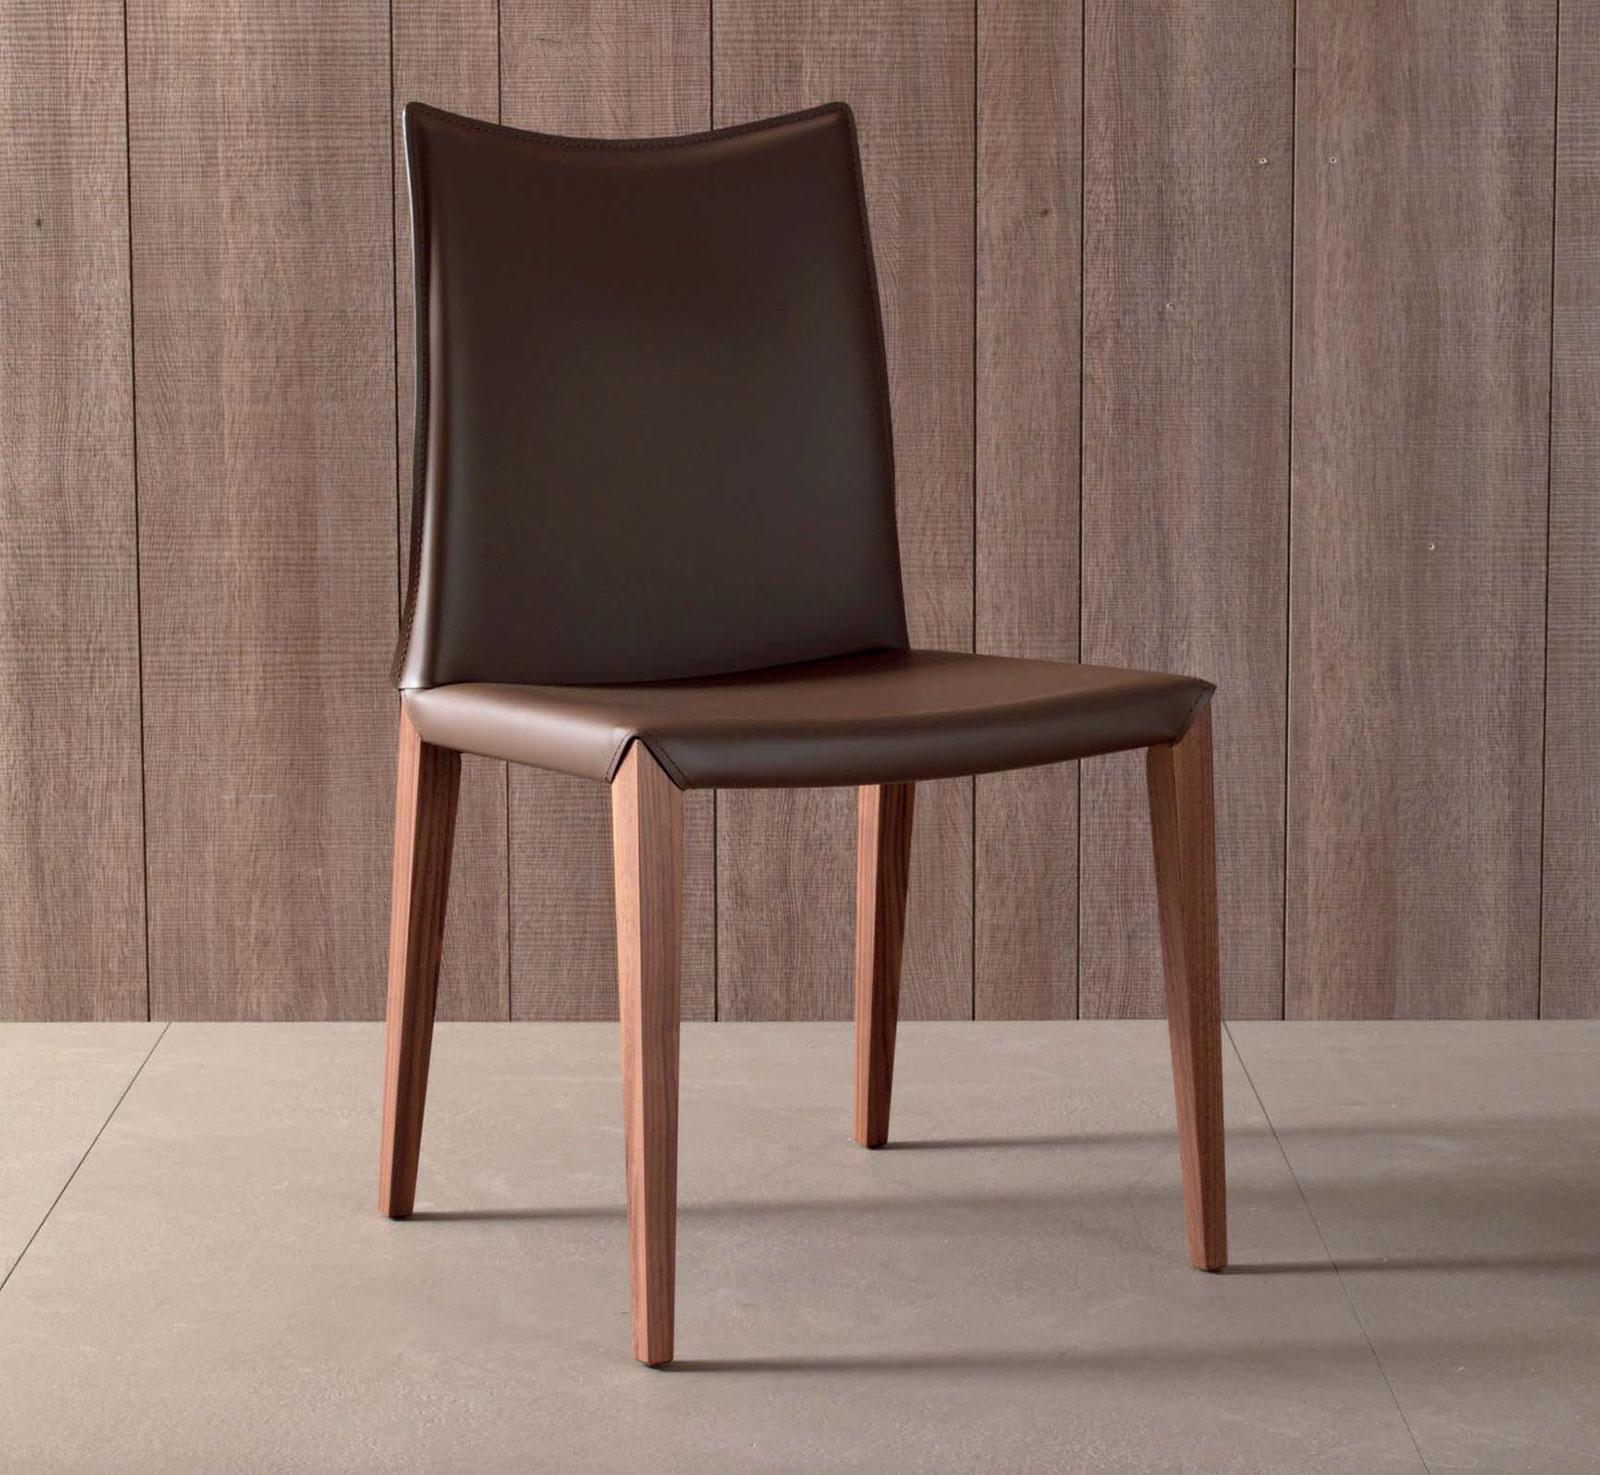 Flory is an ash wood frame chair covered with eco-leather or velvet in several colours. Shop now for dining room faux leather chairs handcrafted in Italy.